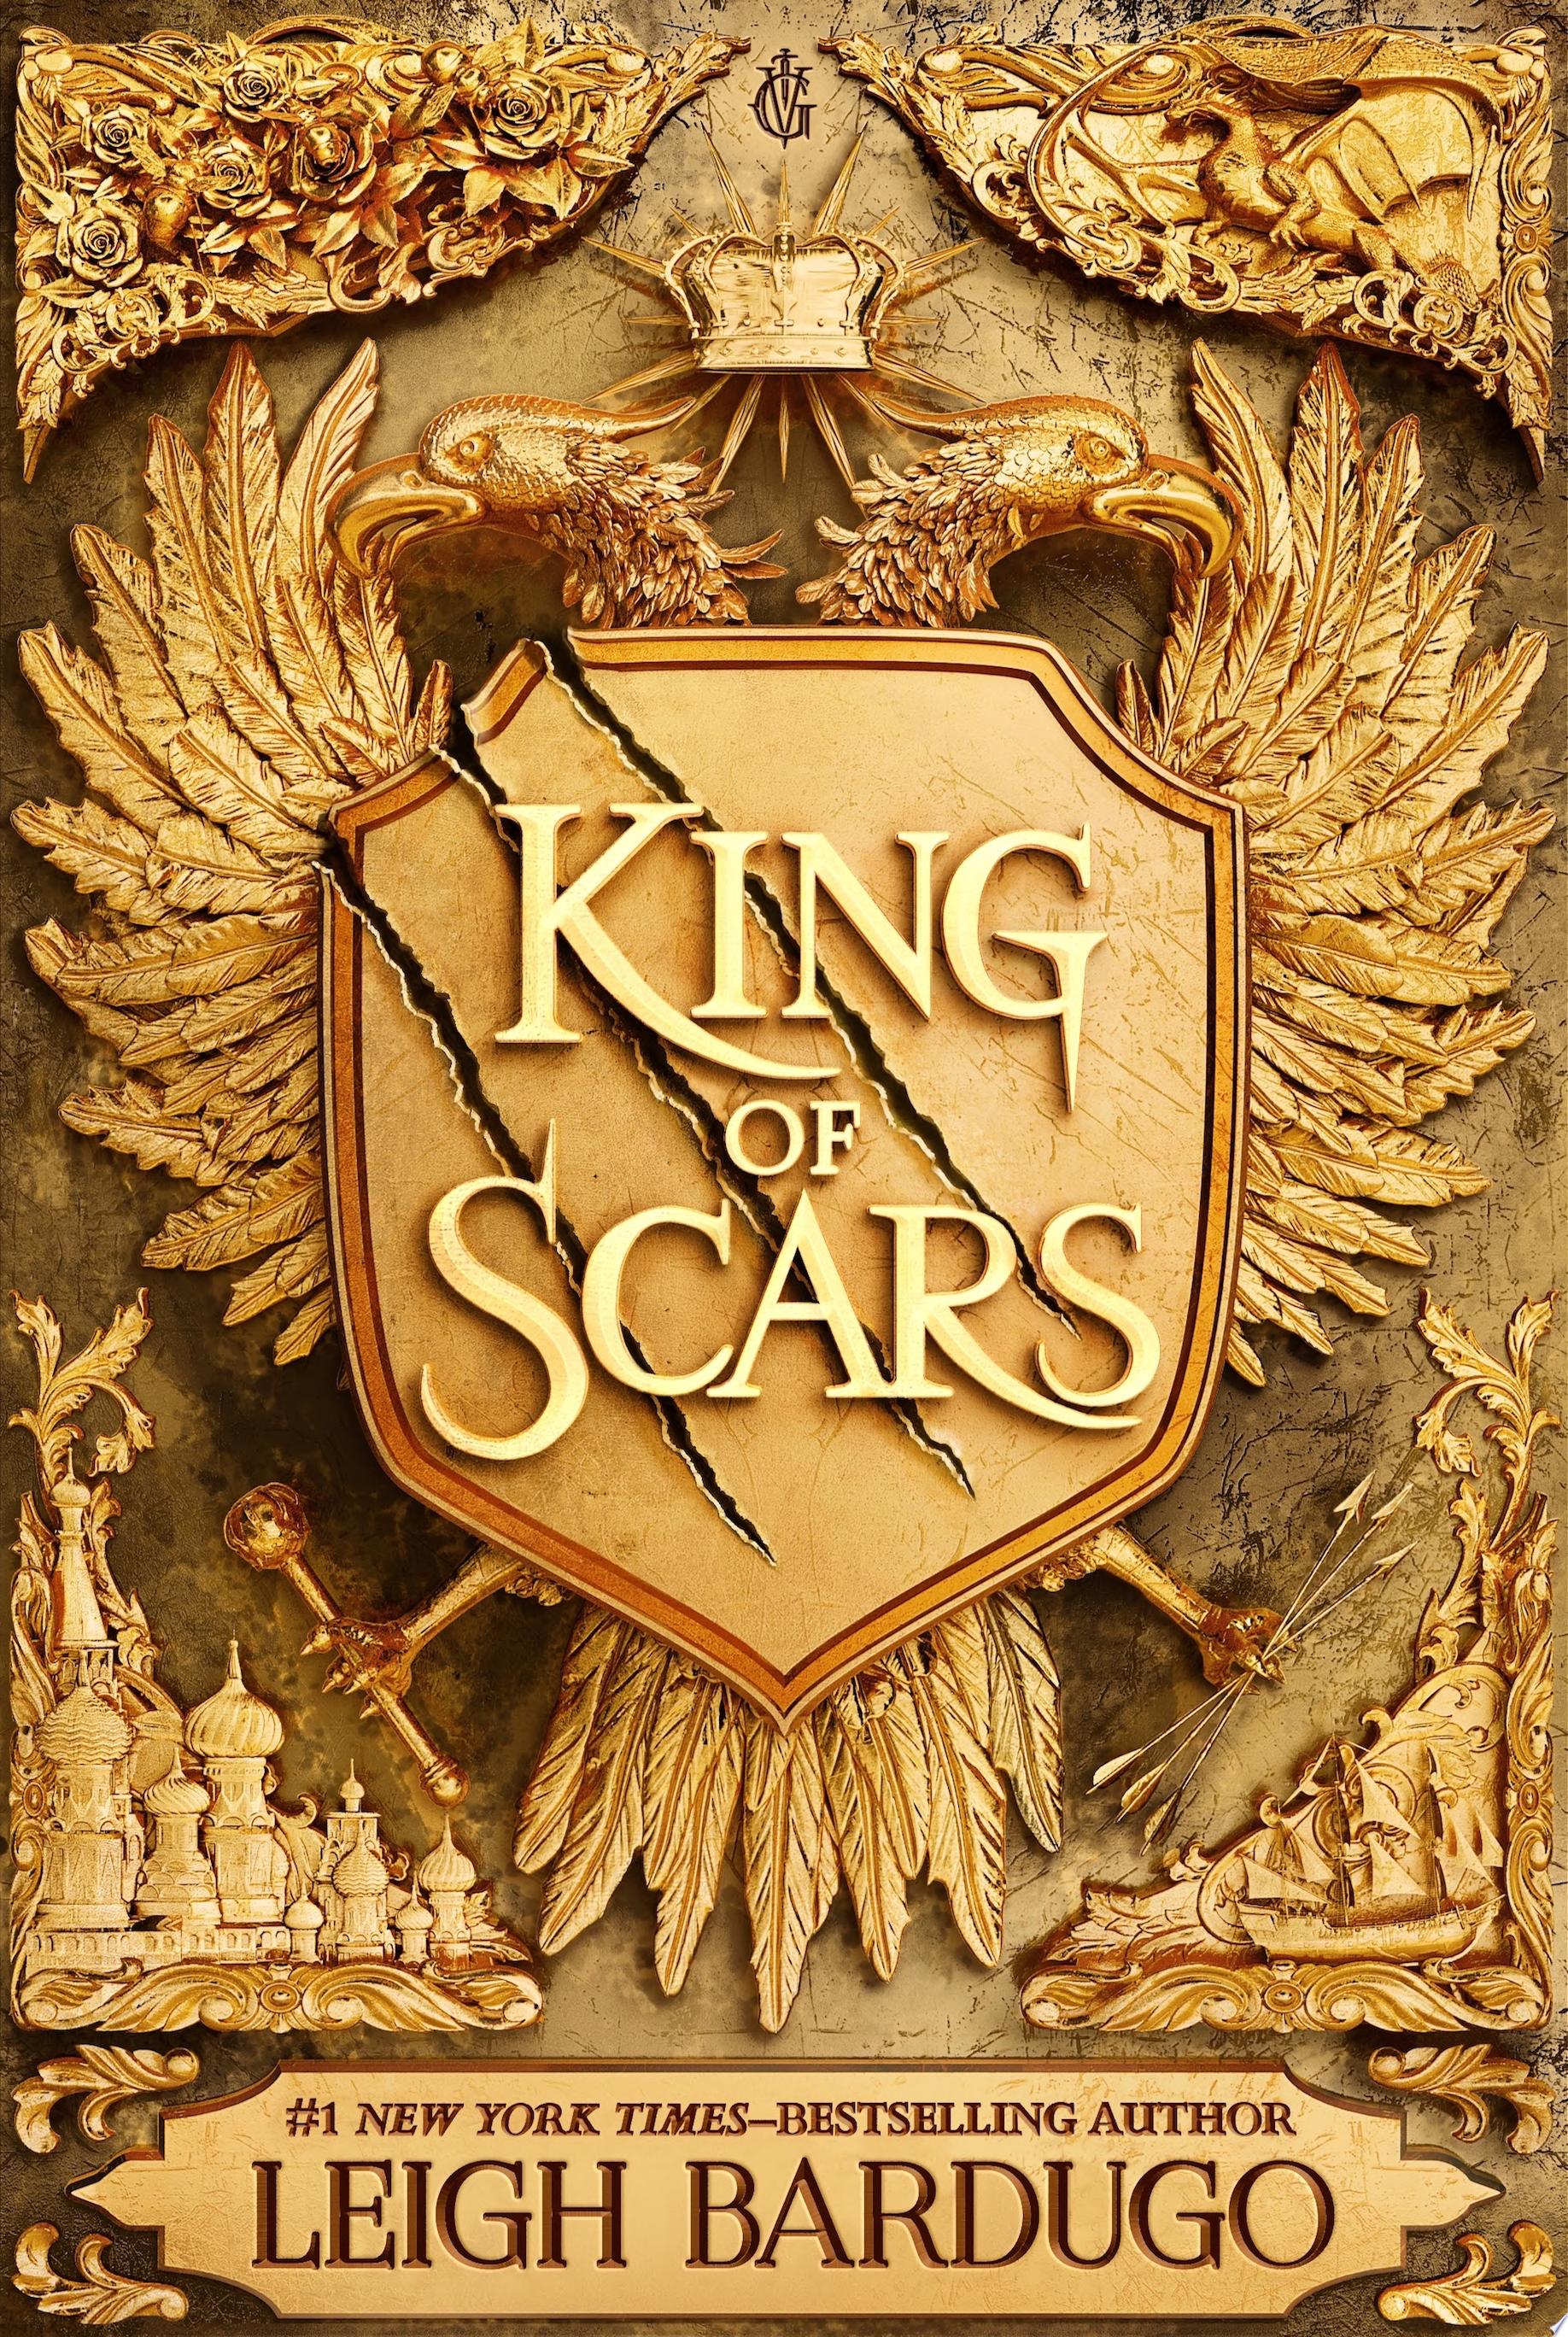 Image for "King of Scars"